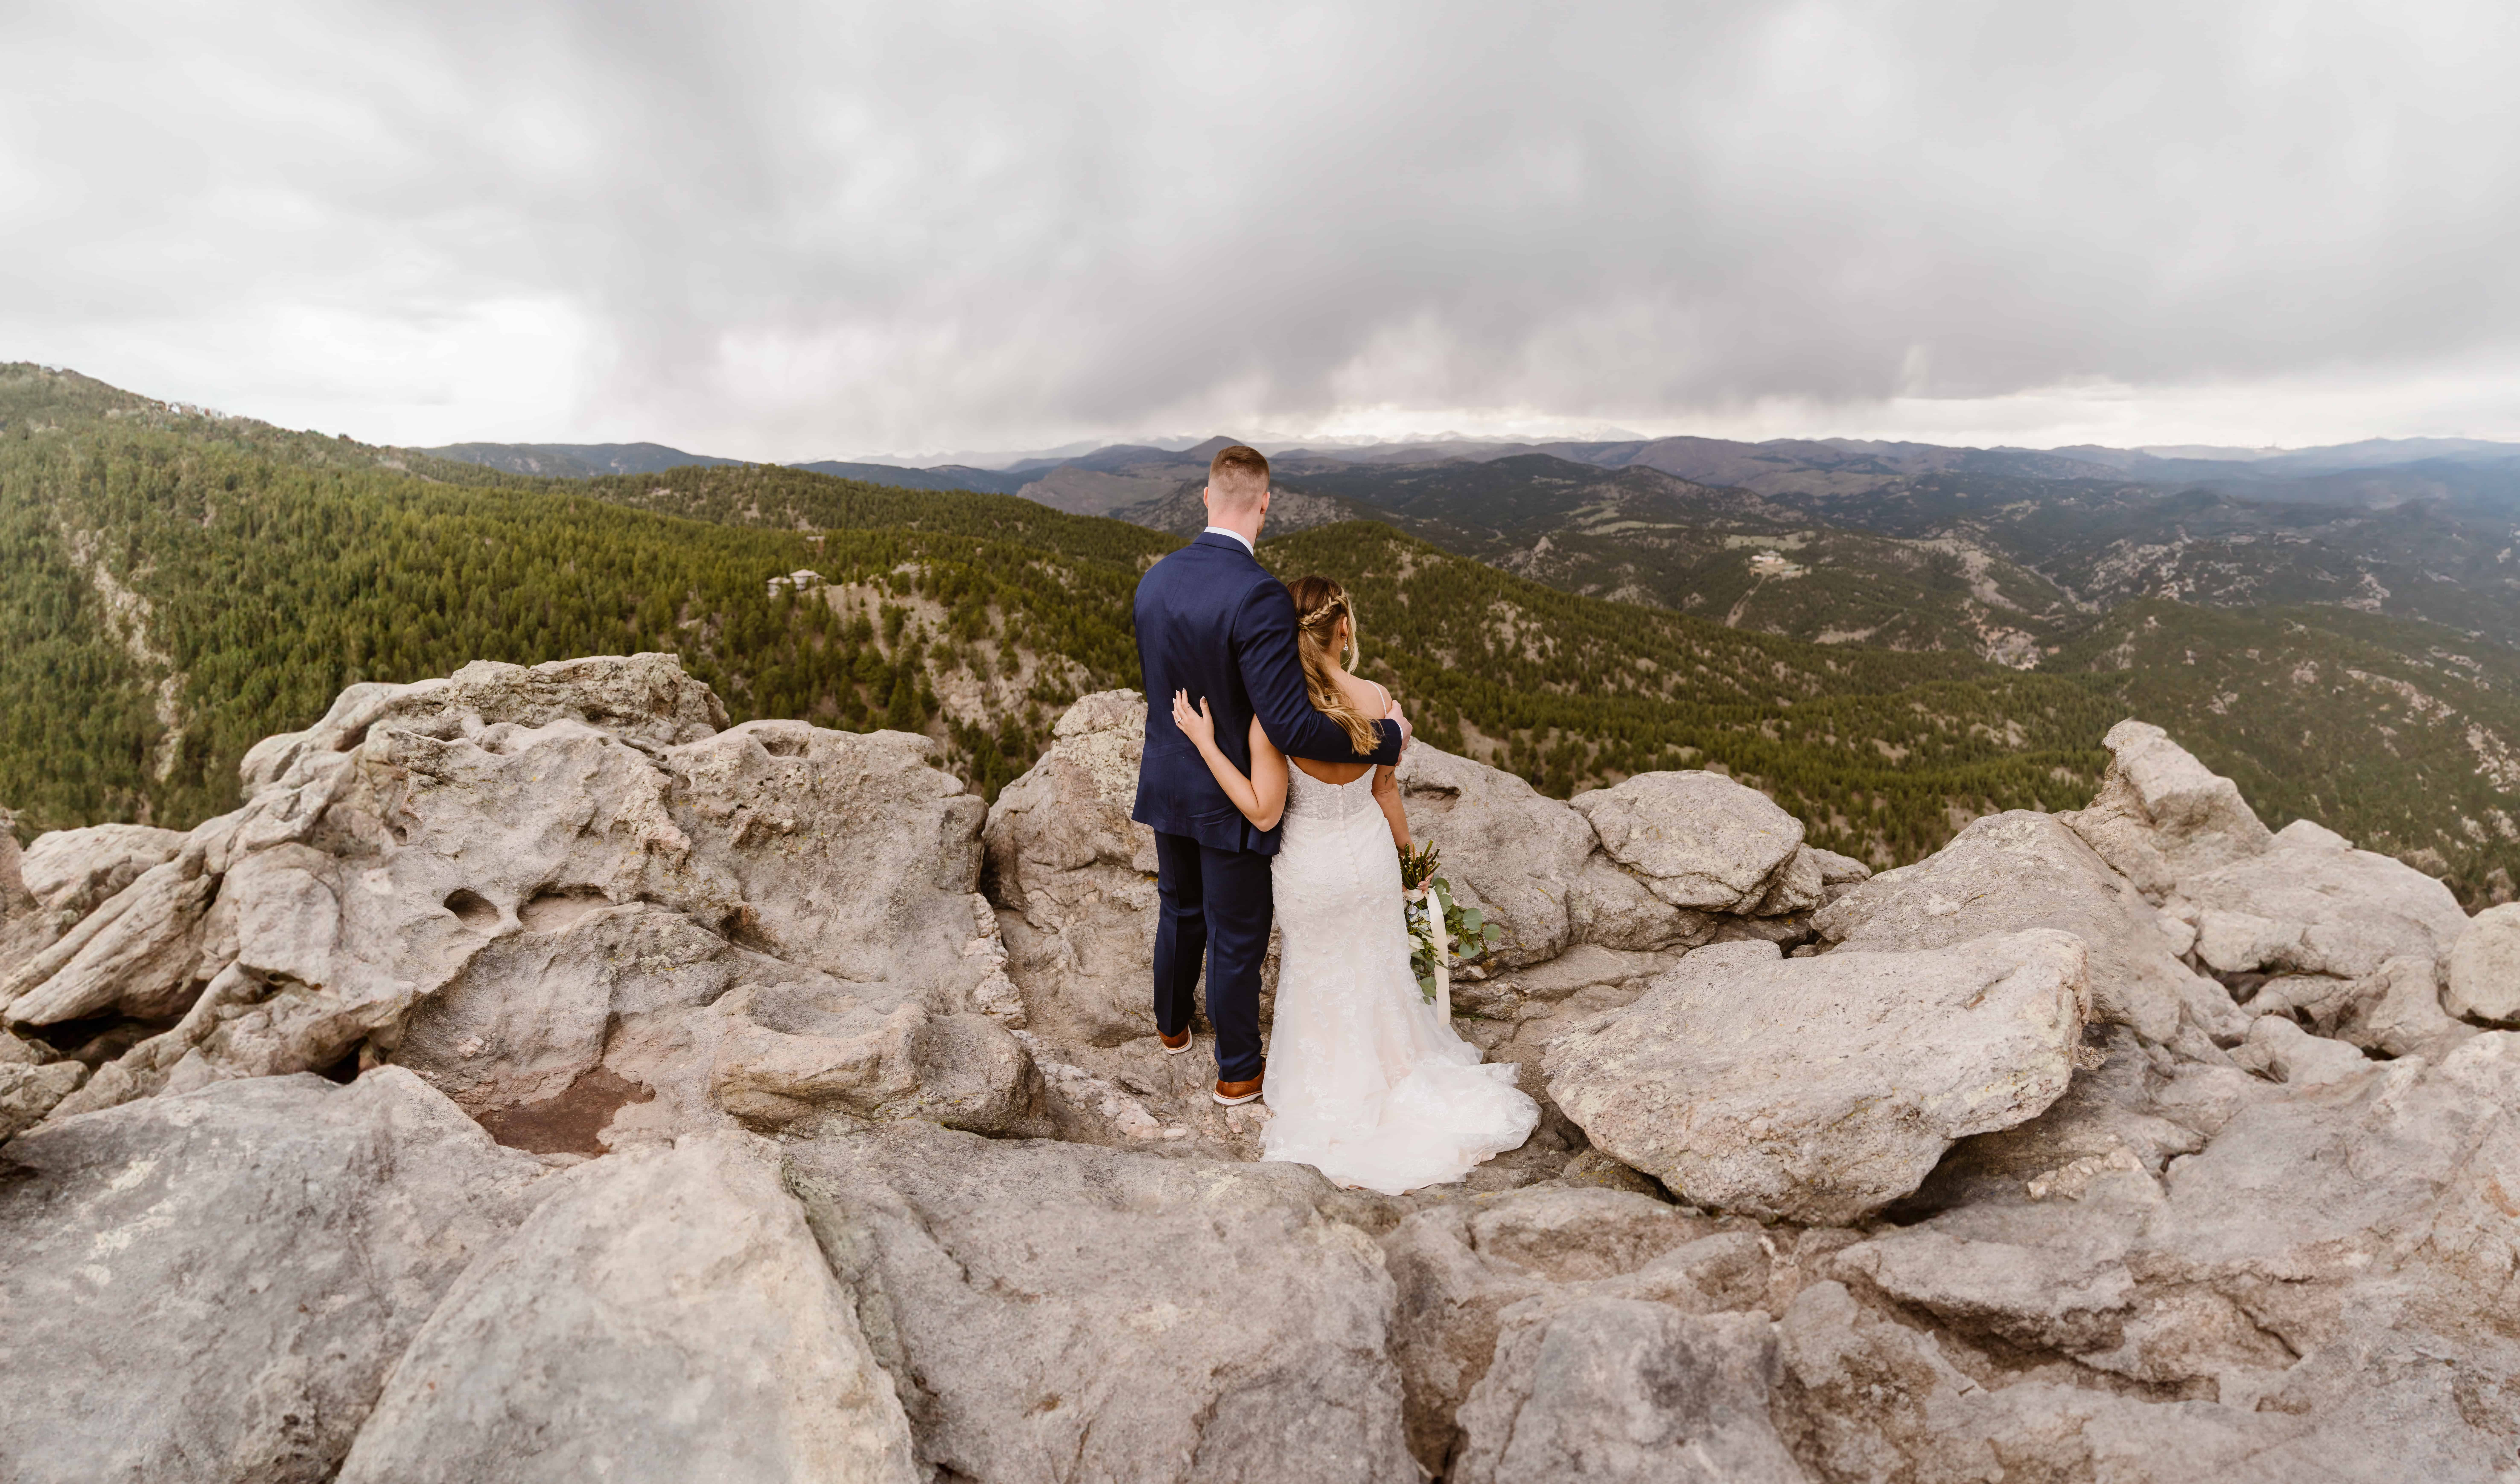 Portraits of the bride and groom after their mountain wedding in Boulder, Colorado